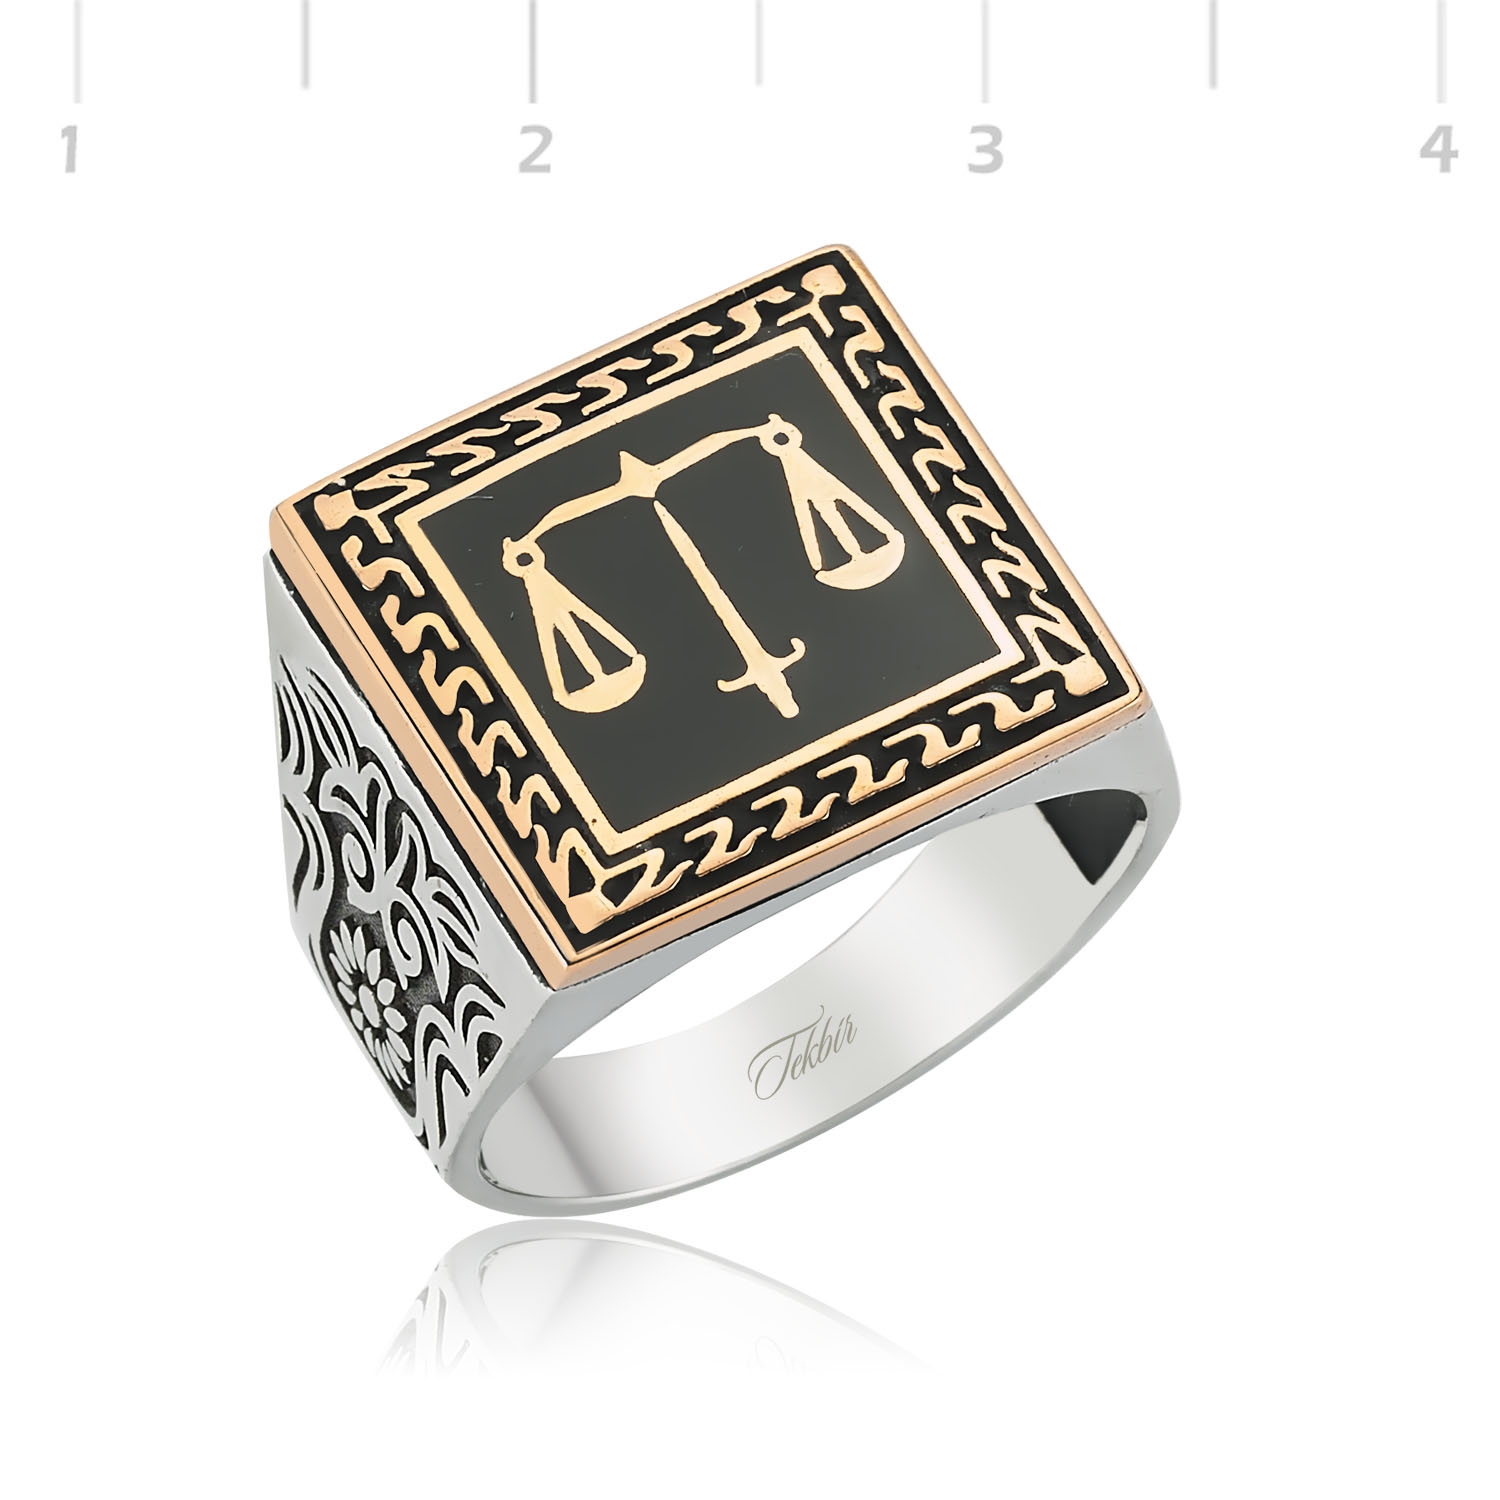 Silver Bootleg Series Justice Ring